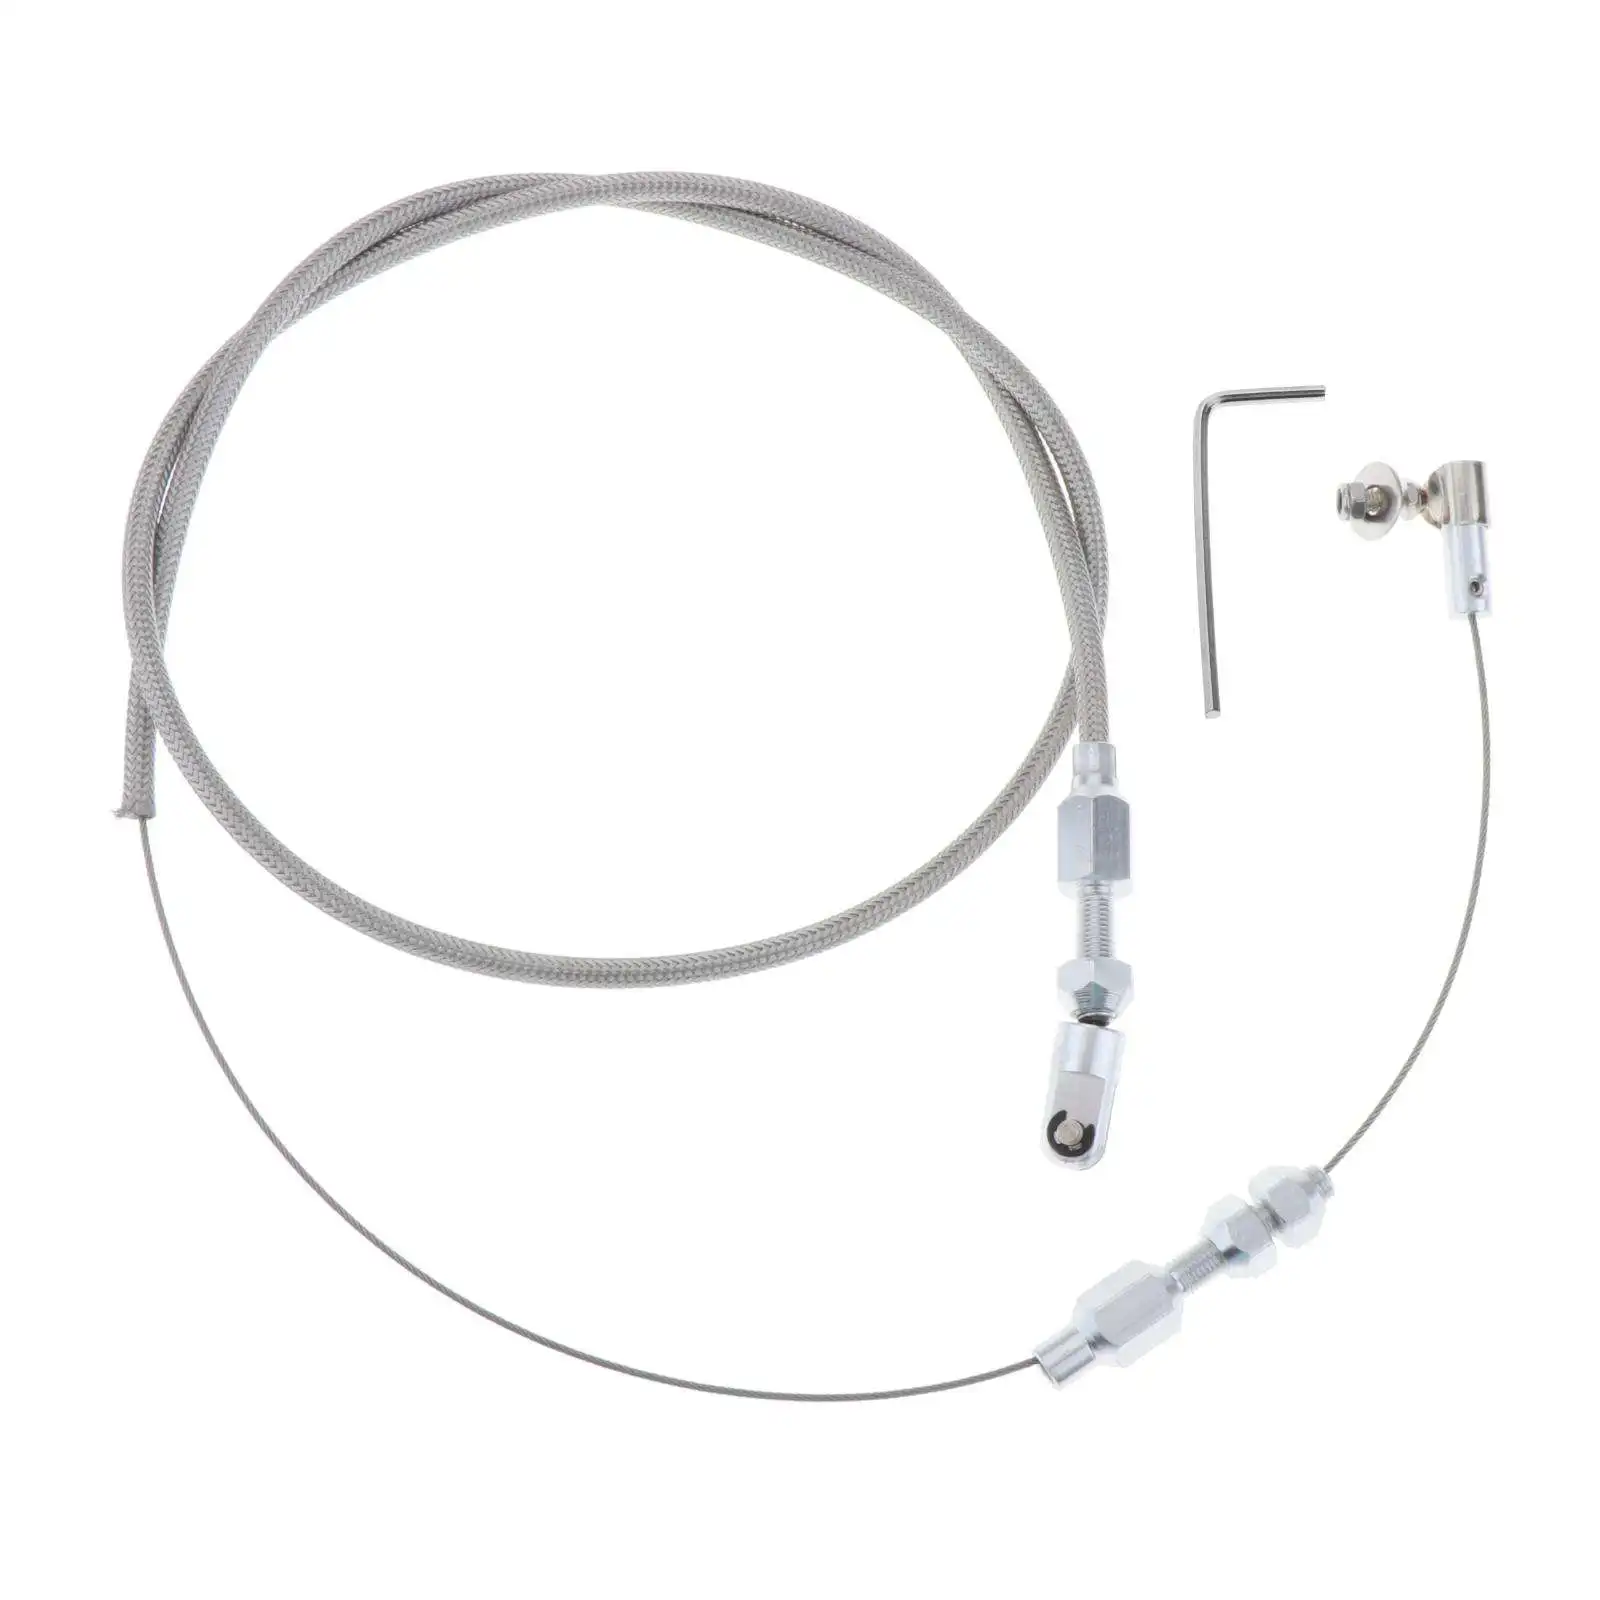 56`` Stainless Steel Silver Throttle Cable Replacement for LS1 4.8 5.3 5.7 6.0 Engine LS